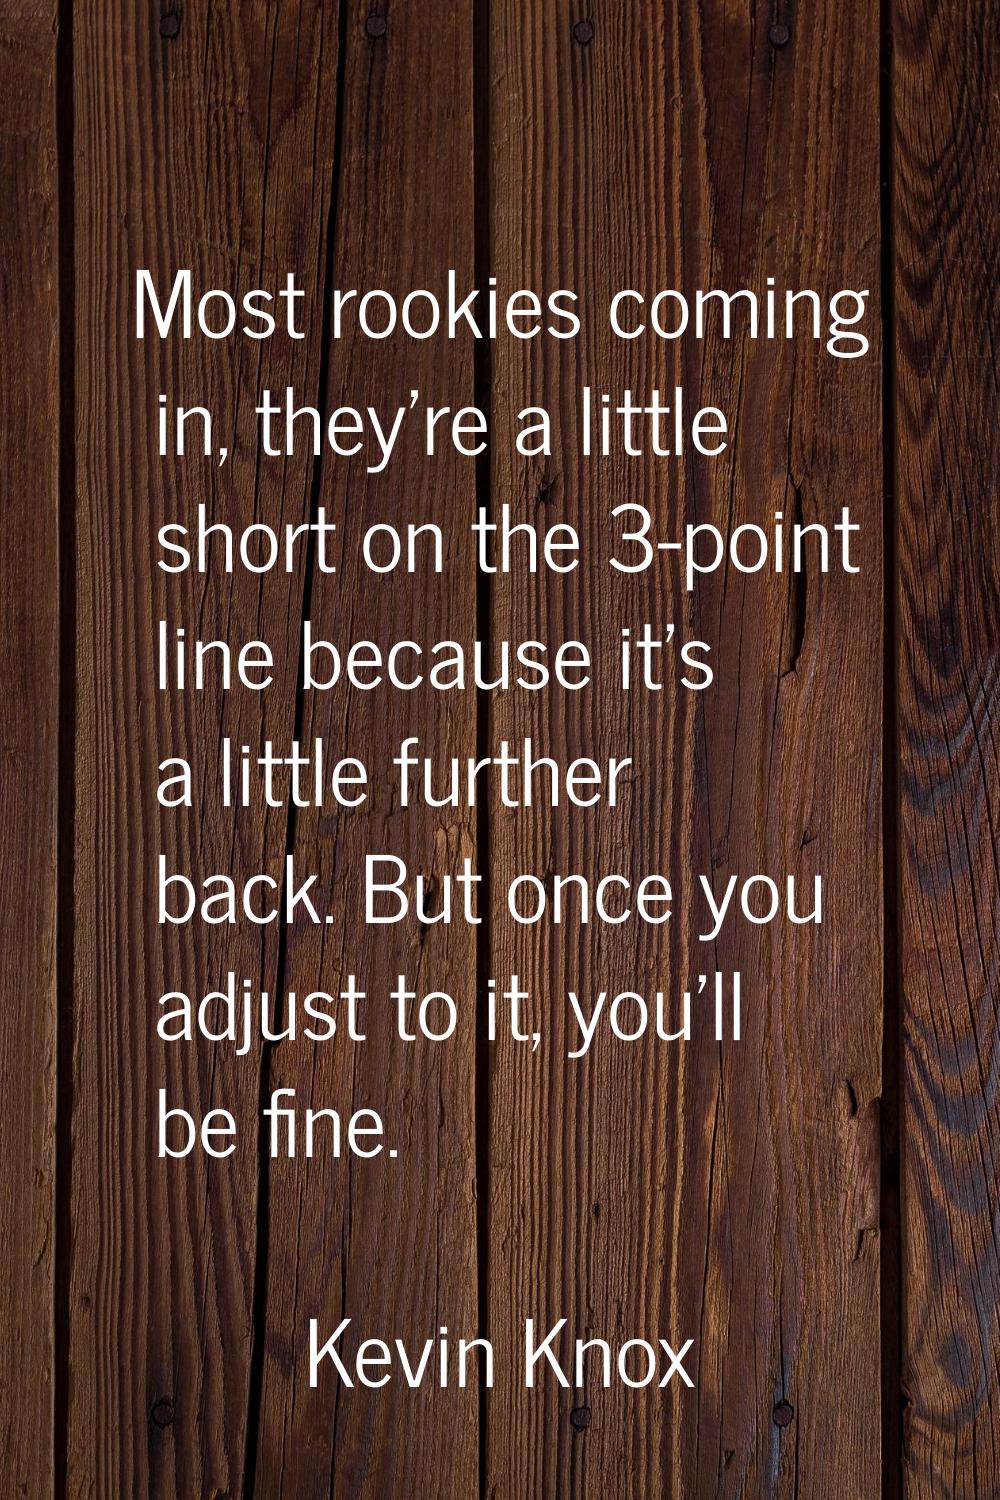 Most rookies coming in, they're a little short on the 3-point line because it's a little further ba